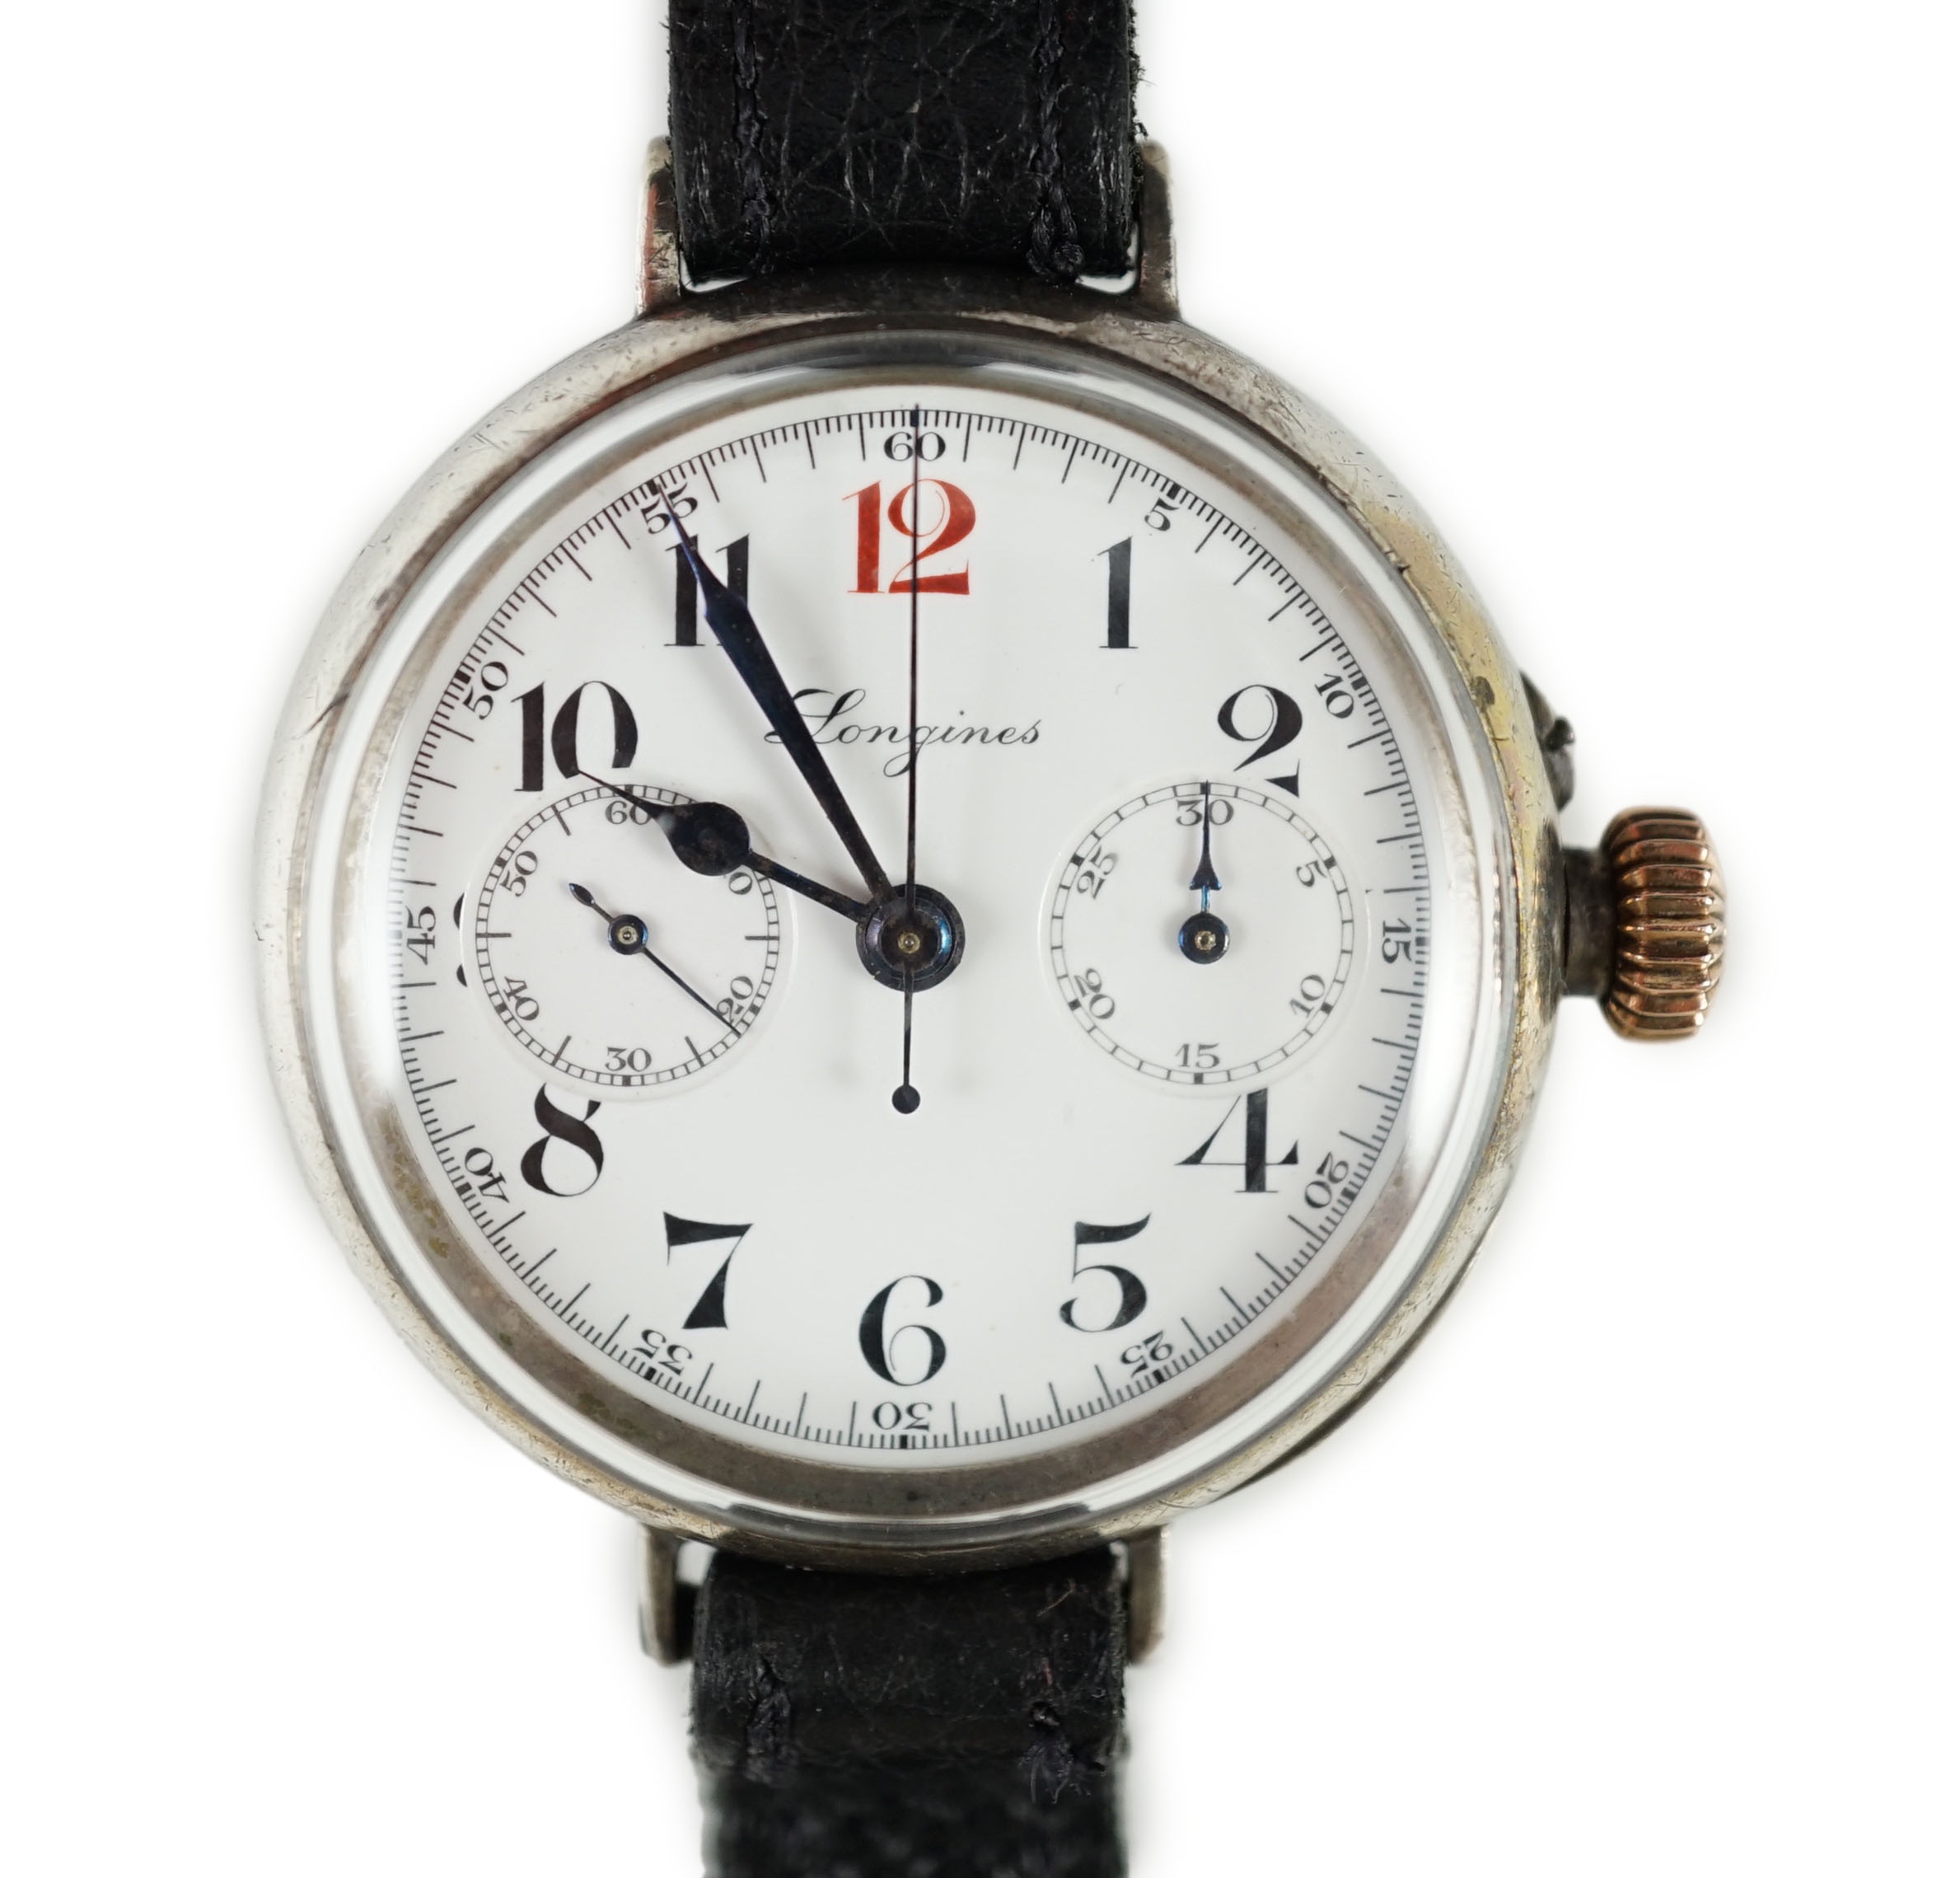 A gentleman's rare early 20th century Longines 900 standard silver manual wind chronograph wrist watch, serial number 2,965,796, movement c.13.33Z